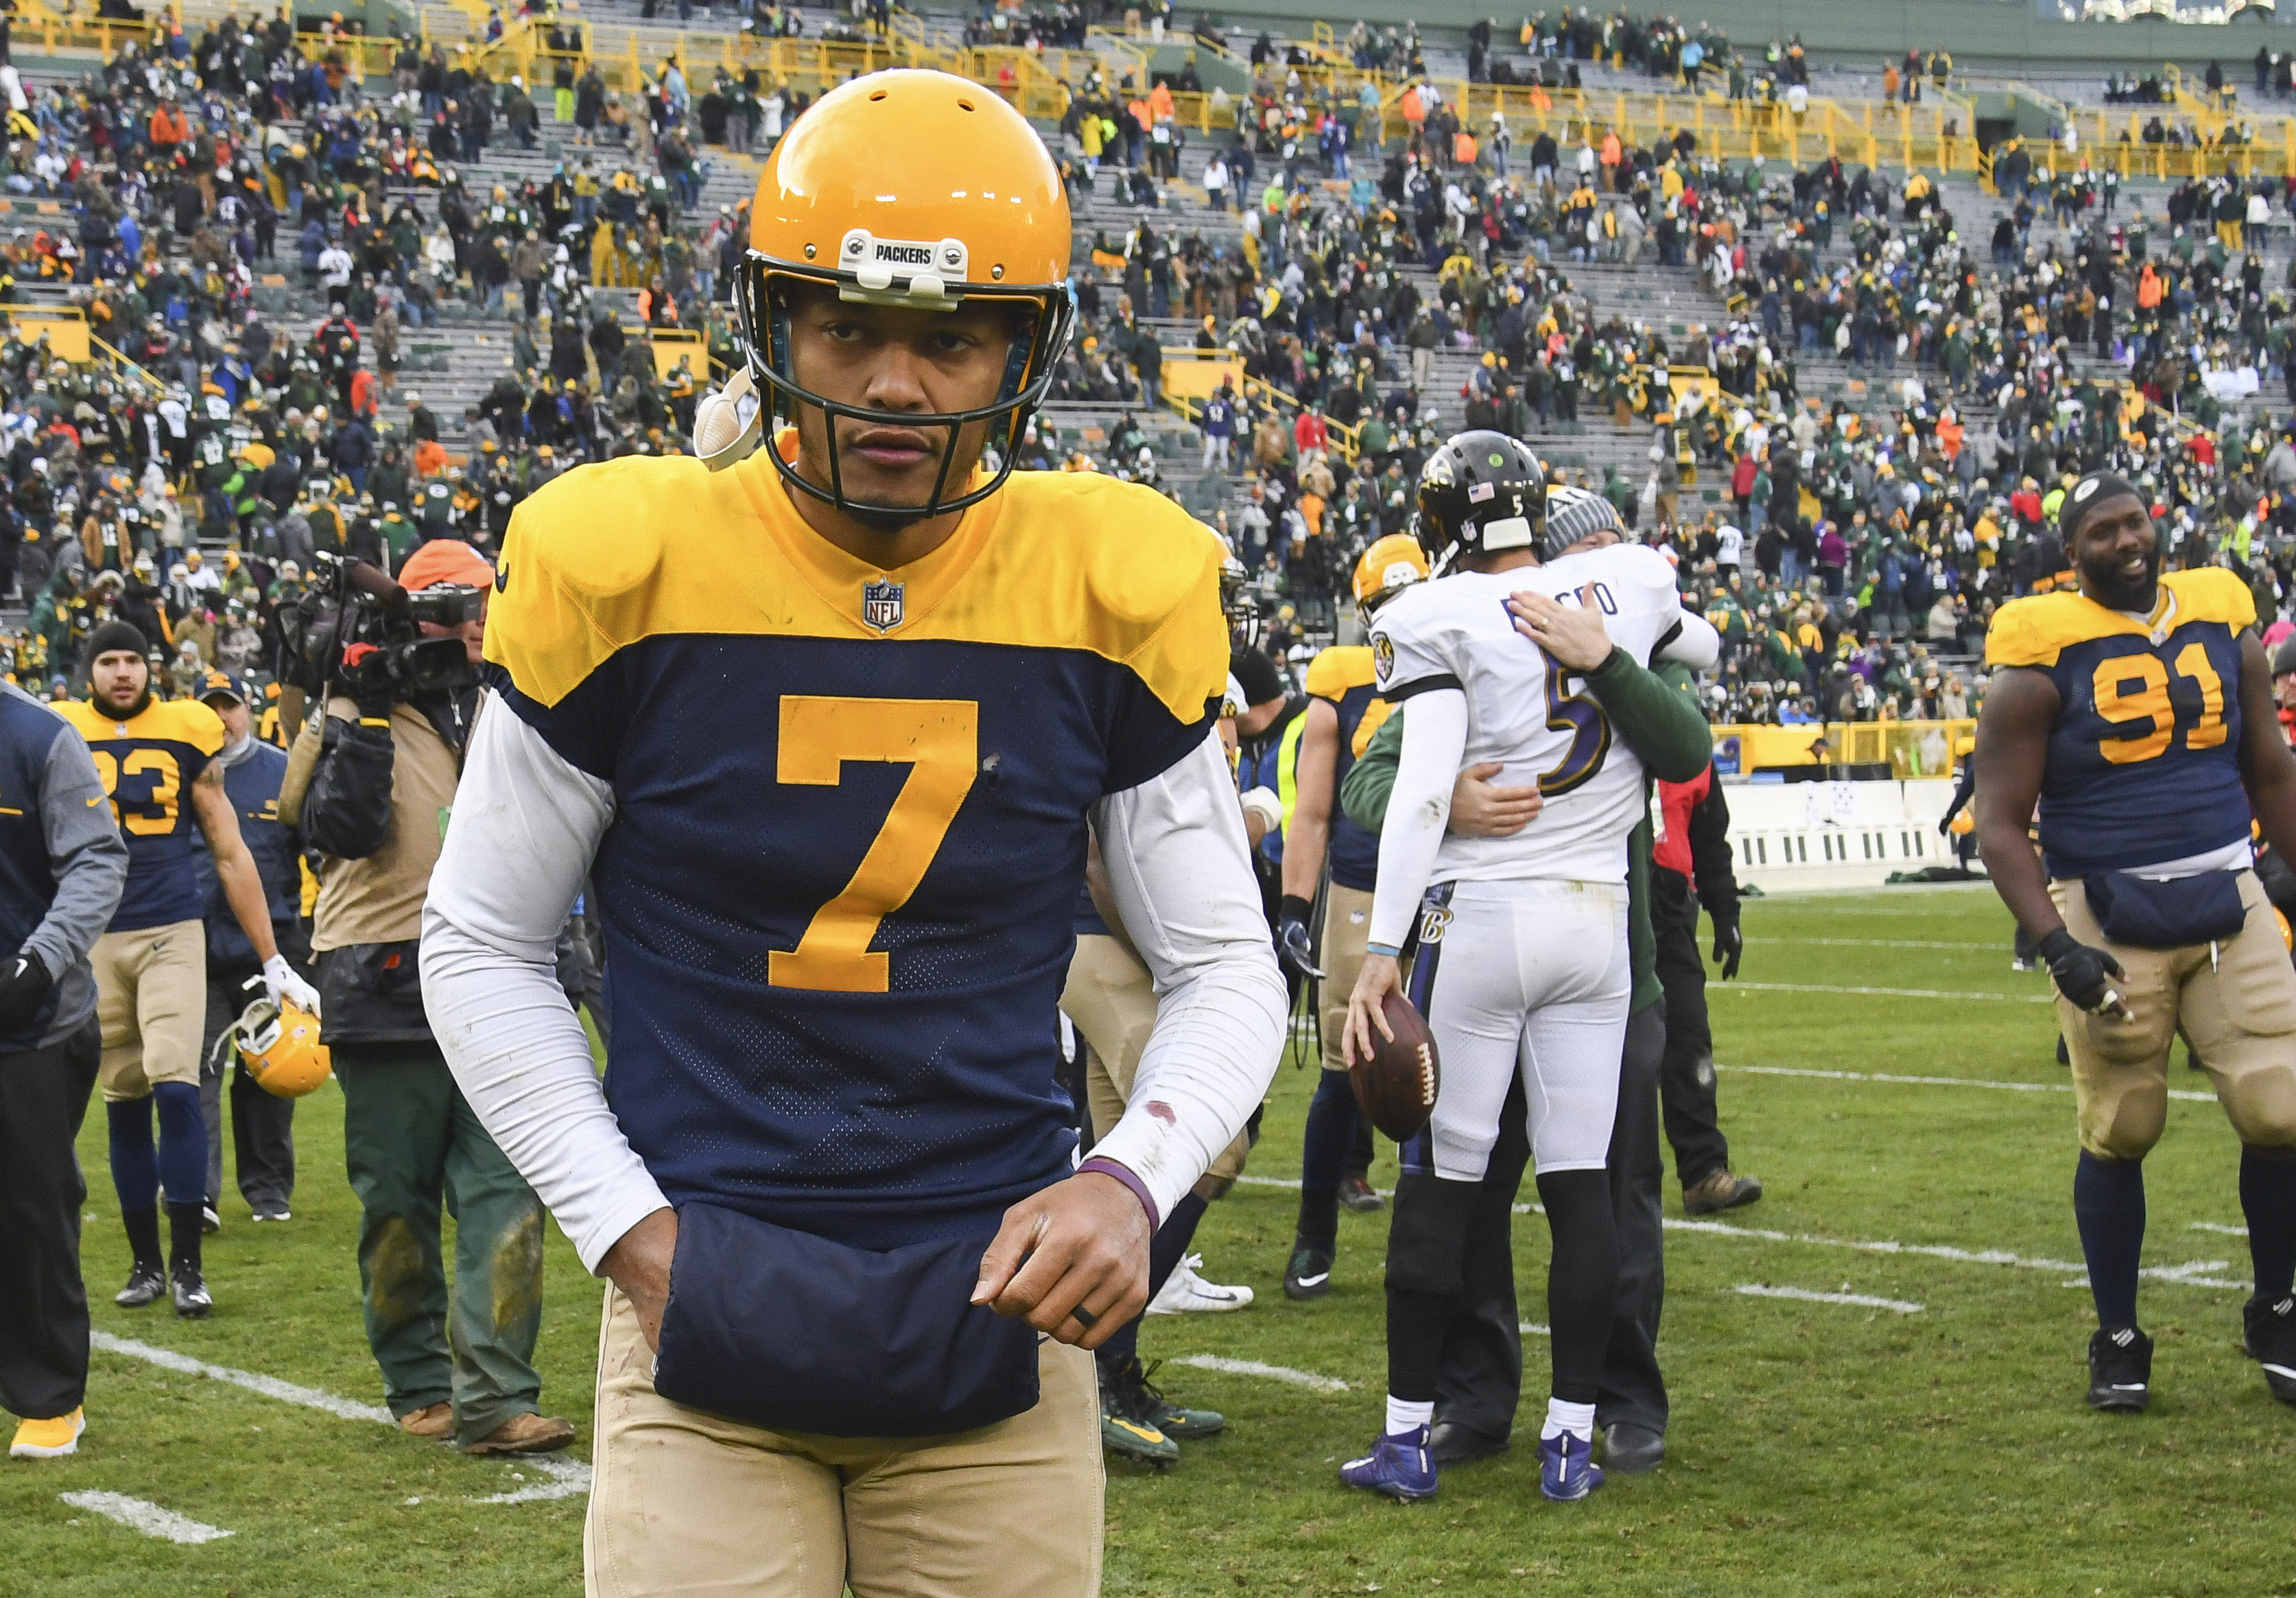 Packers are breaking out sweet throwback jerseys on Sunday